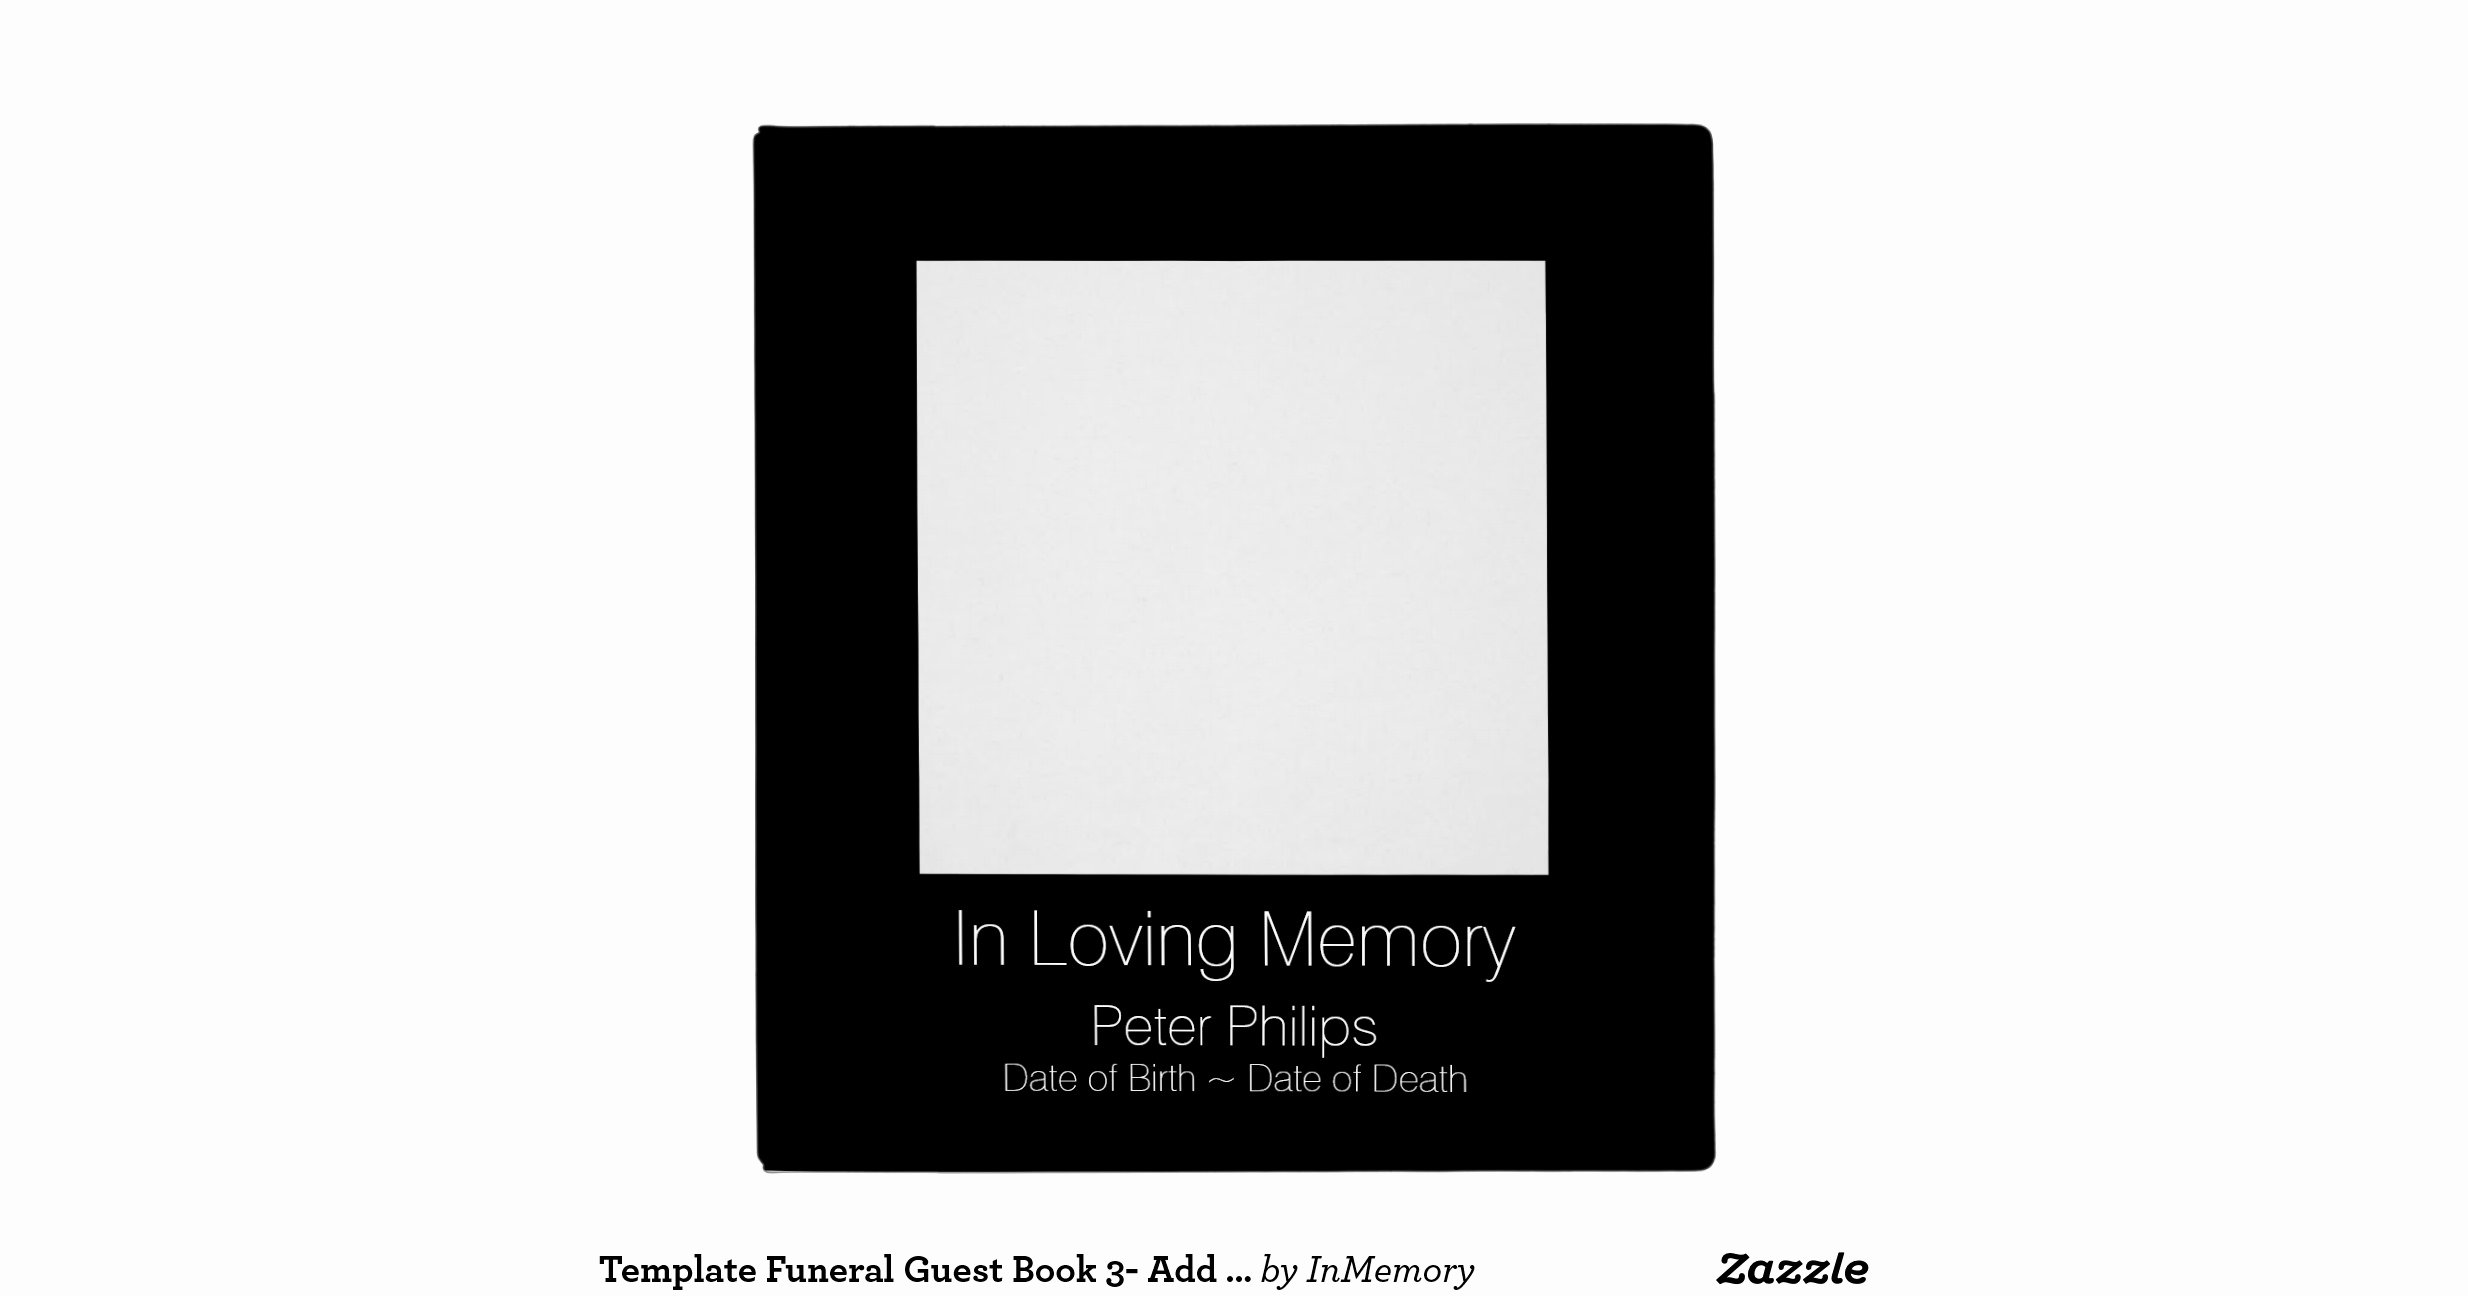 Funeral Guest Book Template New Template Funeral Guest Book 3 Add Favorite Image Binder